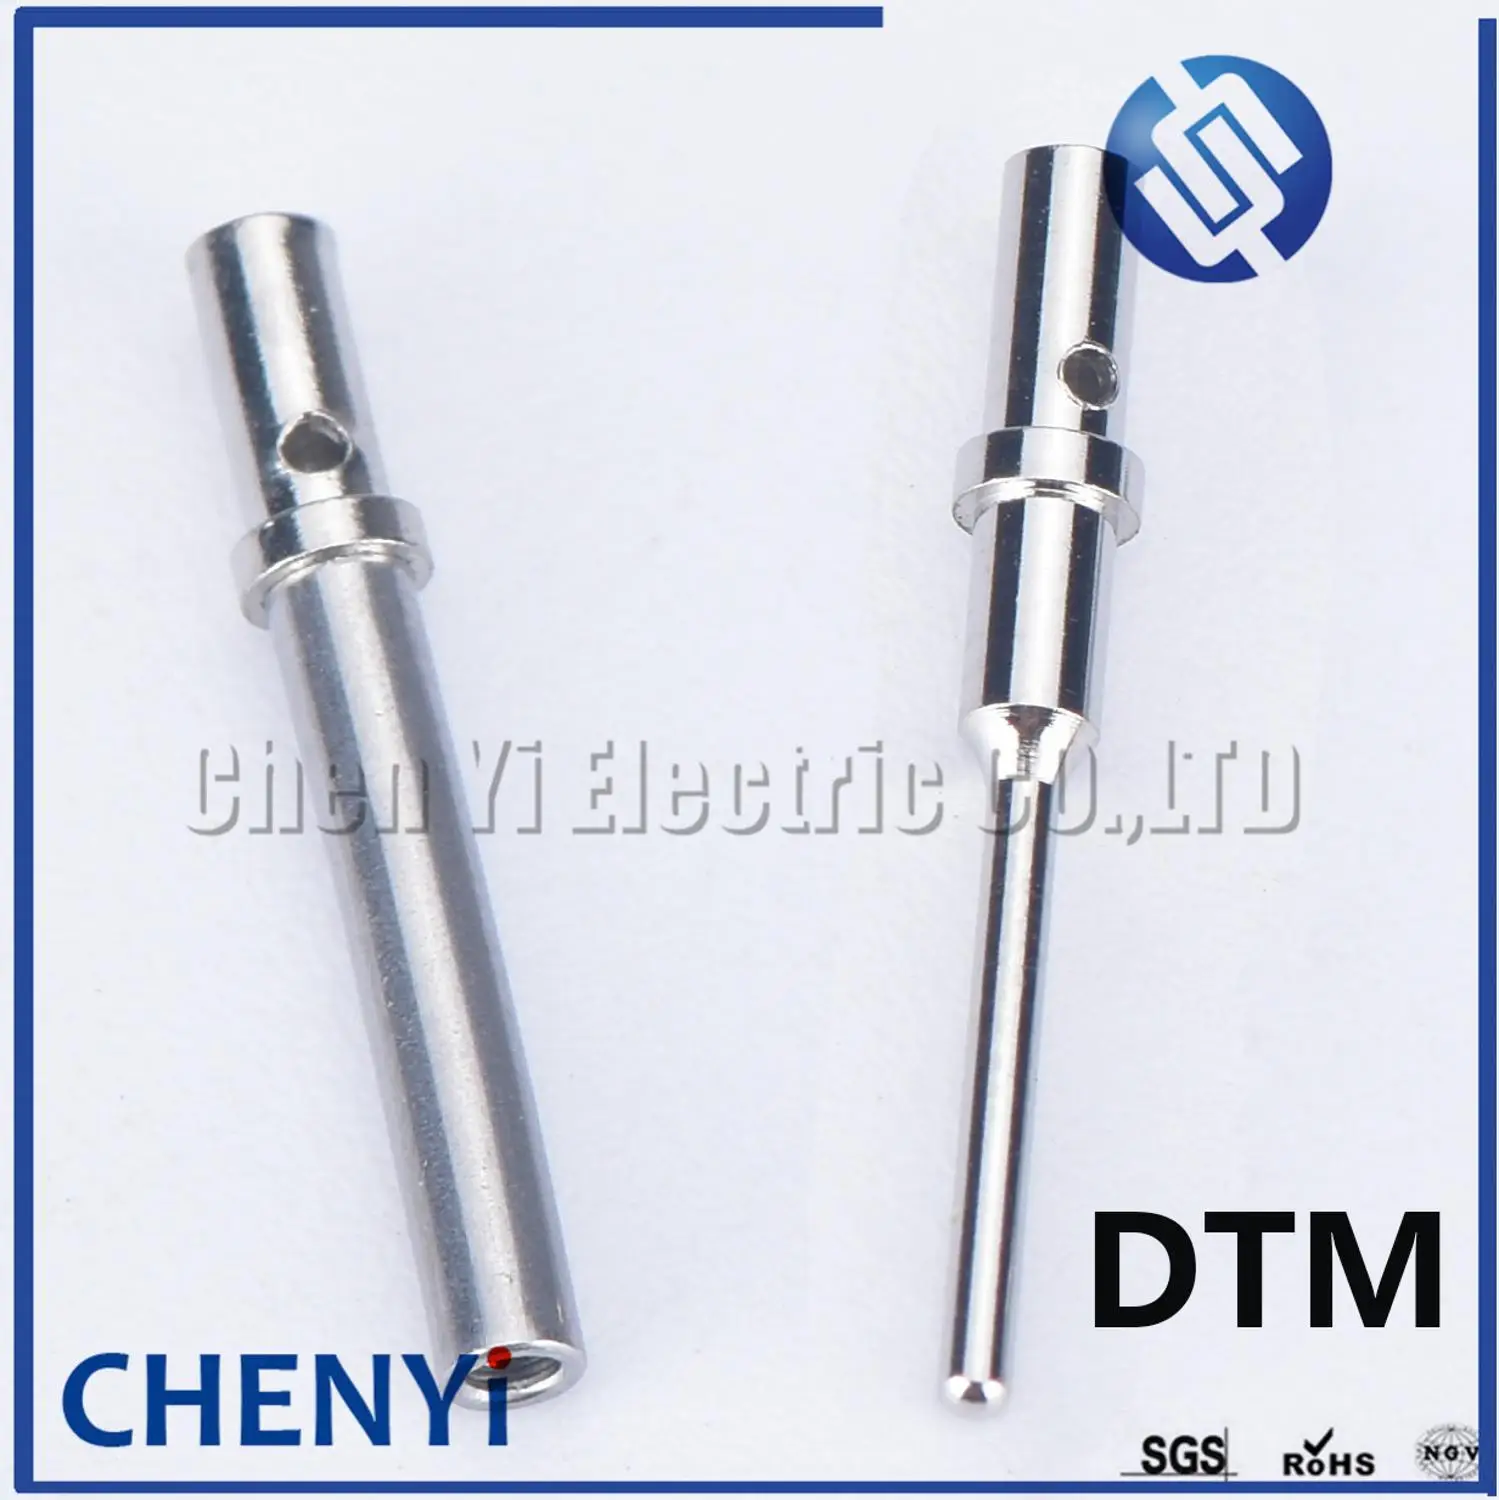 

20 Pcs DTM Series Terminals Pins 0462-201-20141/AT62-201-20141 0460-202-20141 Stainless Steel Solid Terminal Deutsch Pin 20 AWG